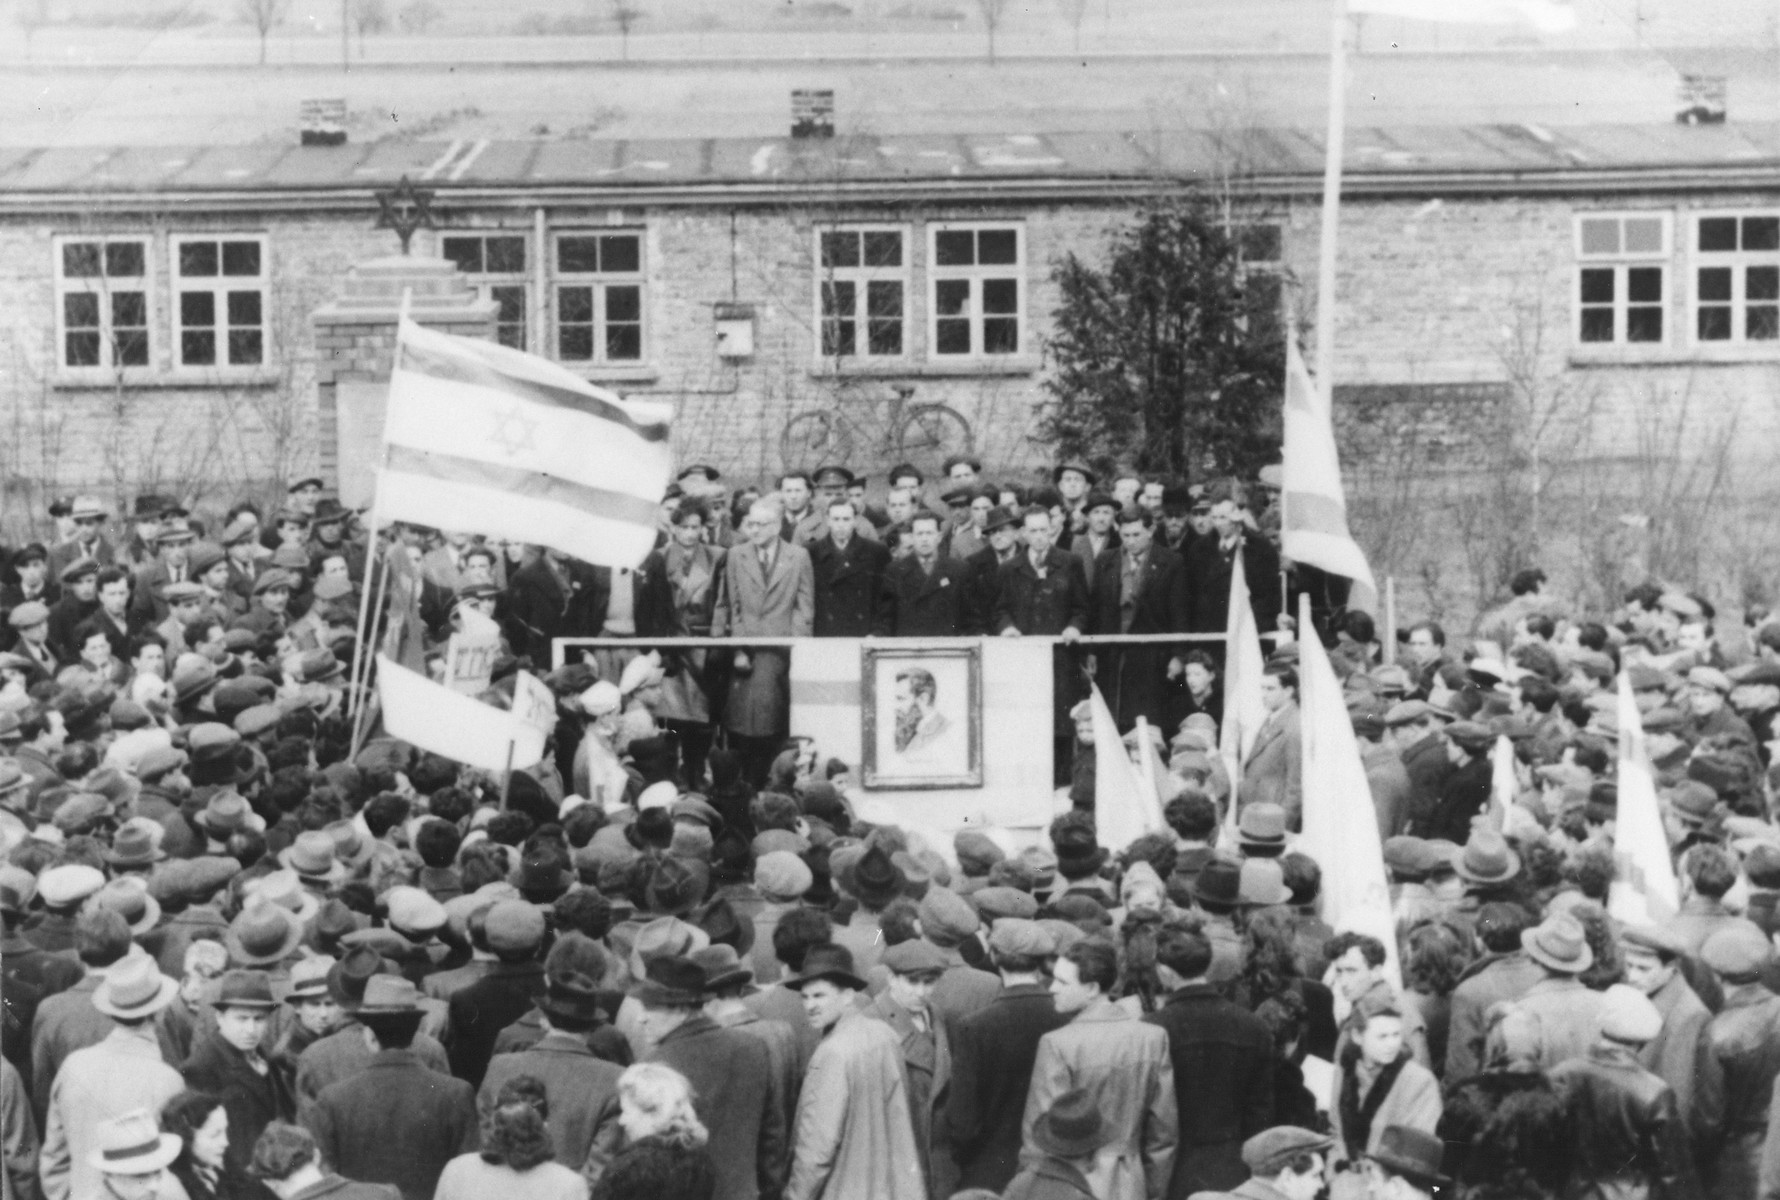 A large crowd rallies in a Zionist demonstration in the Zeilsheim displaced persons' camp.

Pictured among the men on the platform is Jona Wisgardsky.